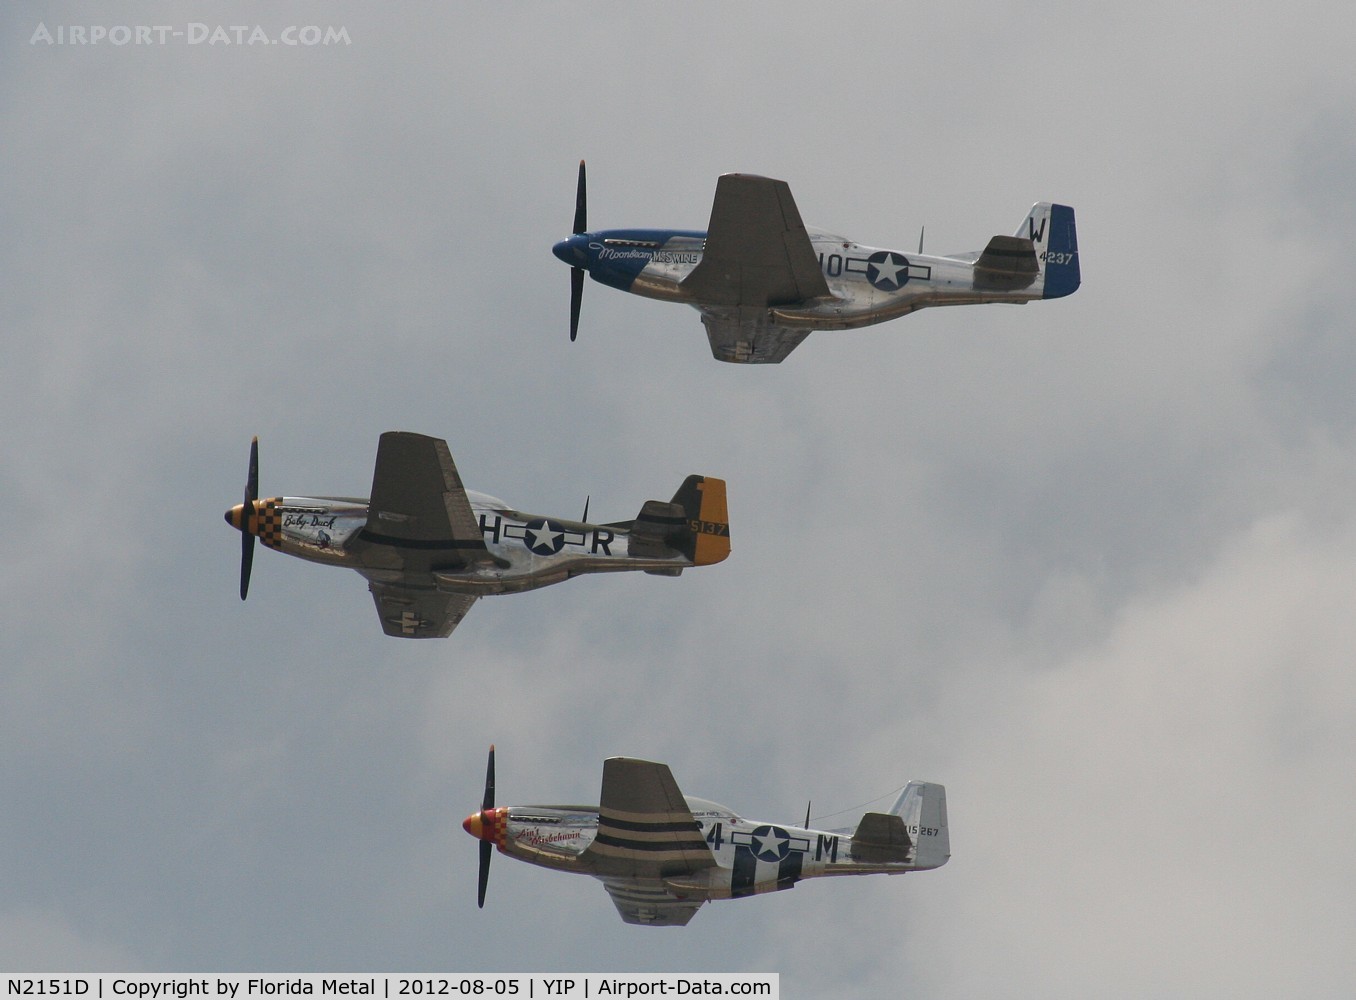 N2151D, 1944 North American F-51D Mustang C/N 122-40196, 3 ship formation